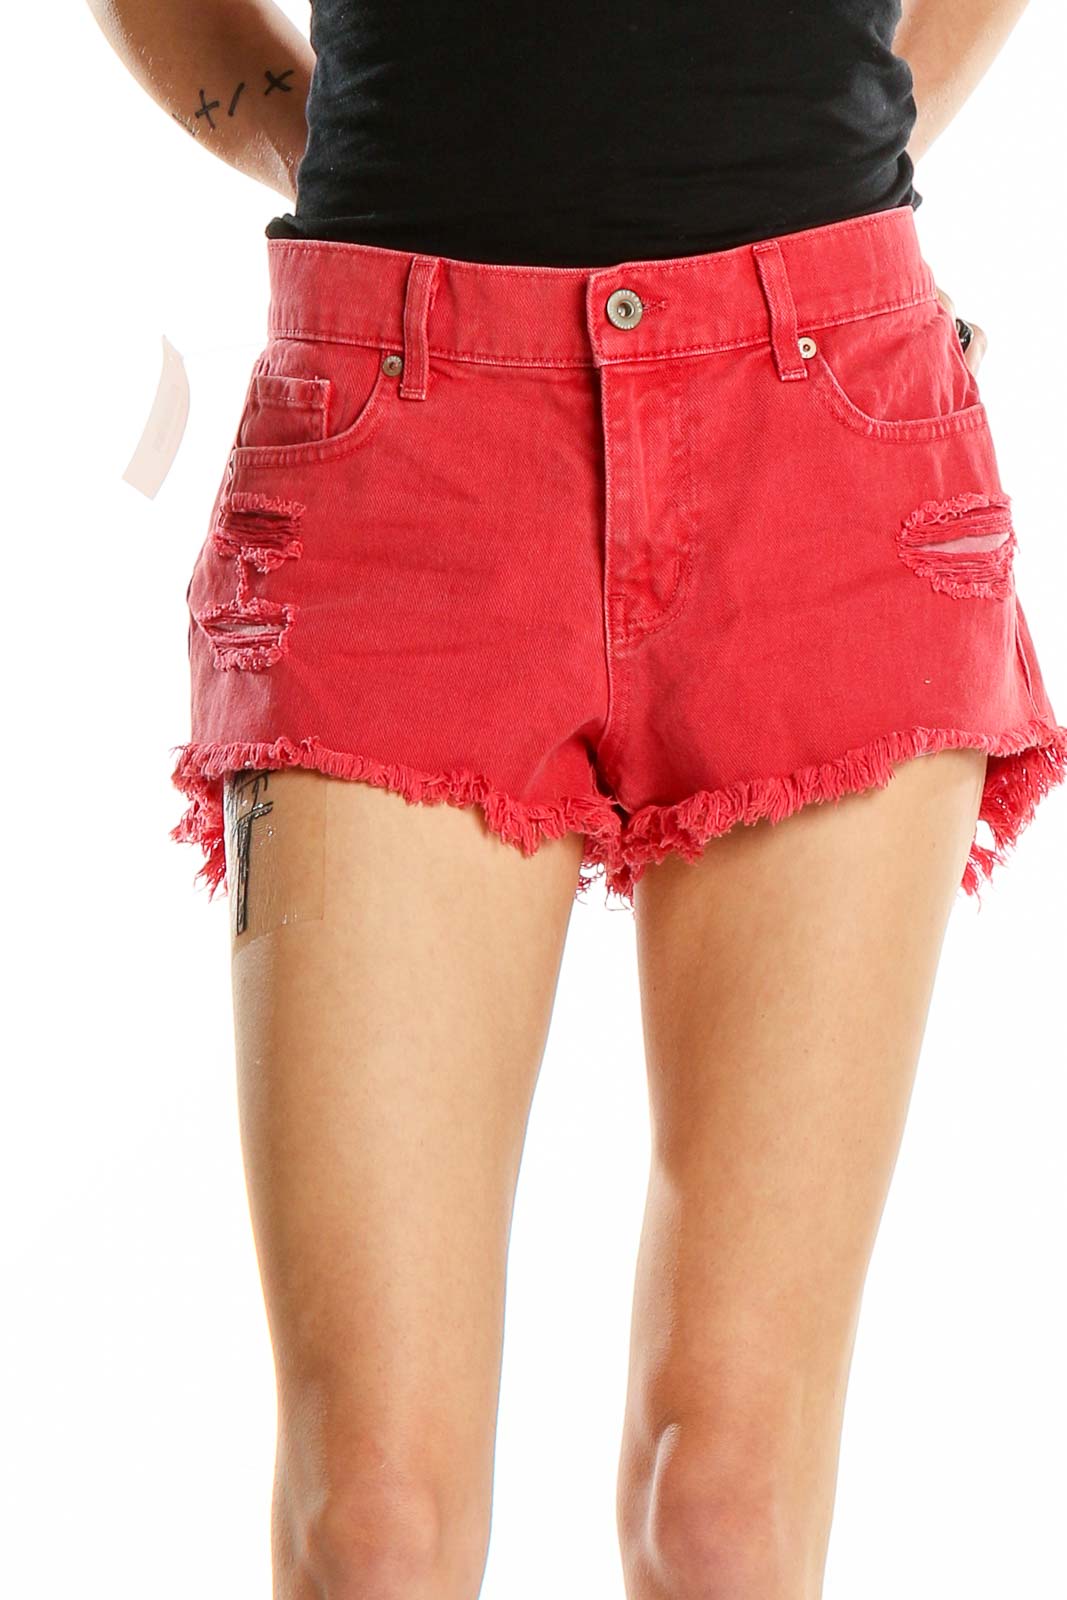 Shop Shorts With Points or SilkRoll Cash 